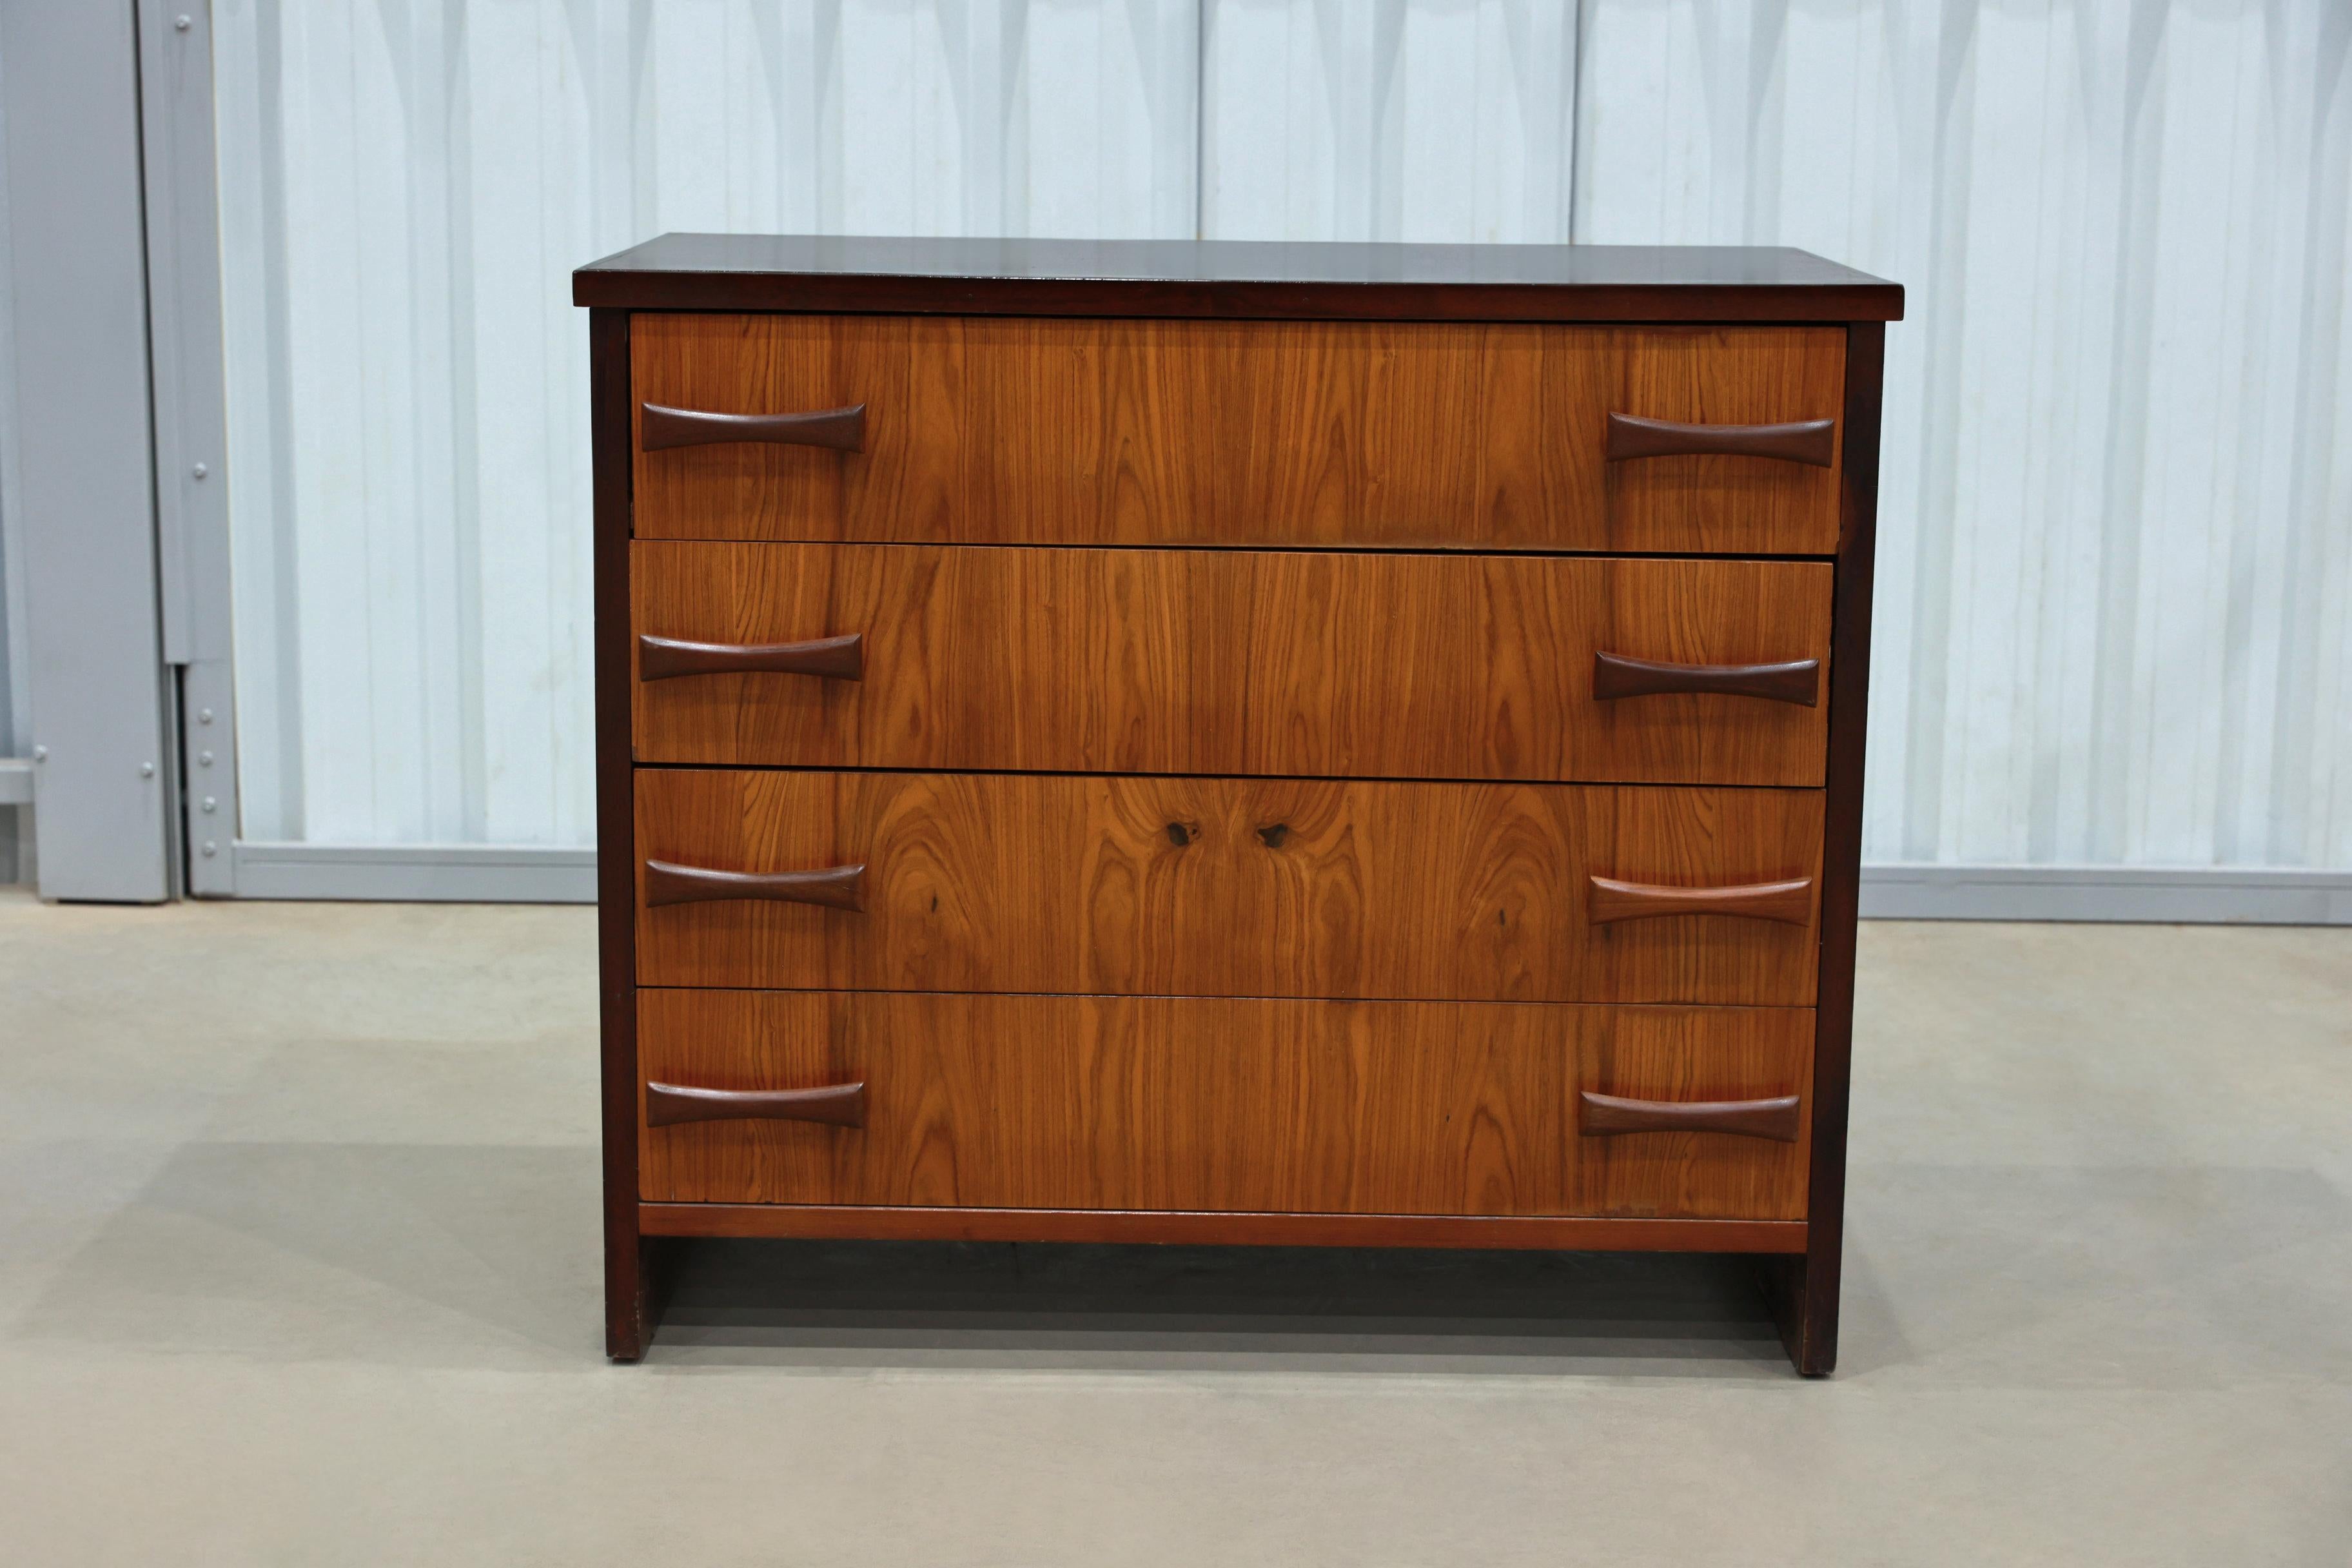 This chest of drawers is made in Caviuna wood and features four pull-out drawers with wooden handles on each side. The wood on this piece has a beautiful color and pattern and has been refinished to be in excellent condition. If you are looking for